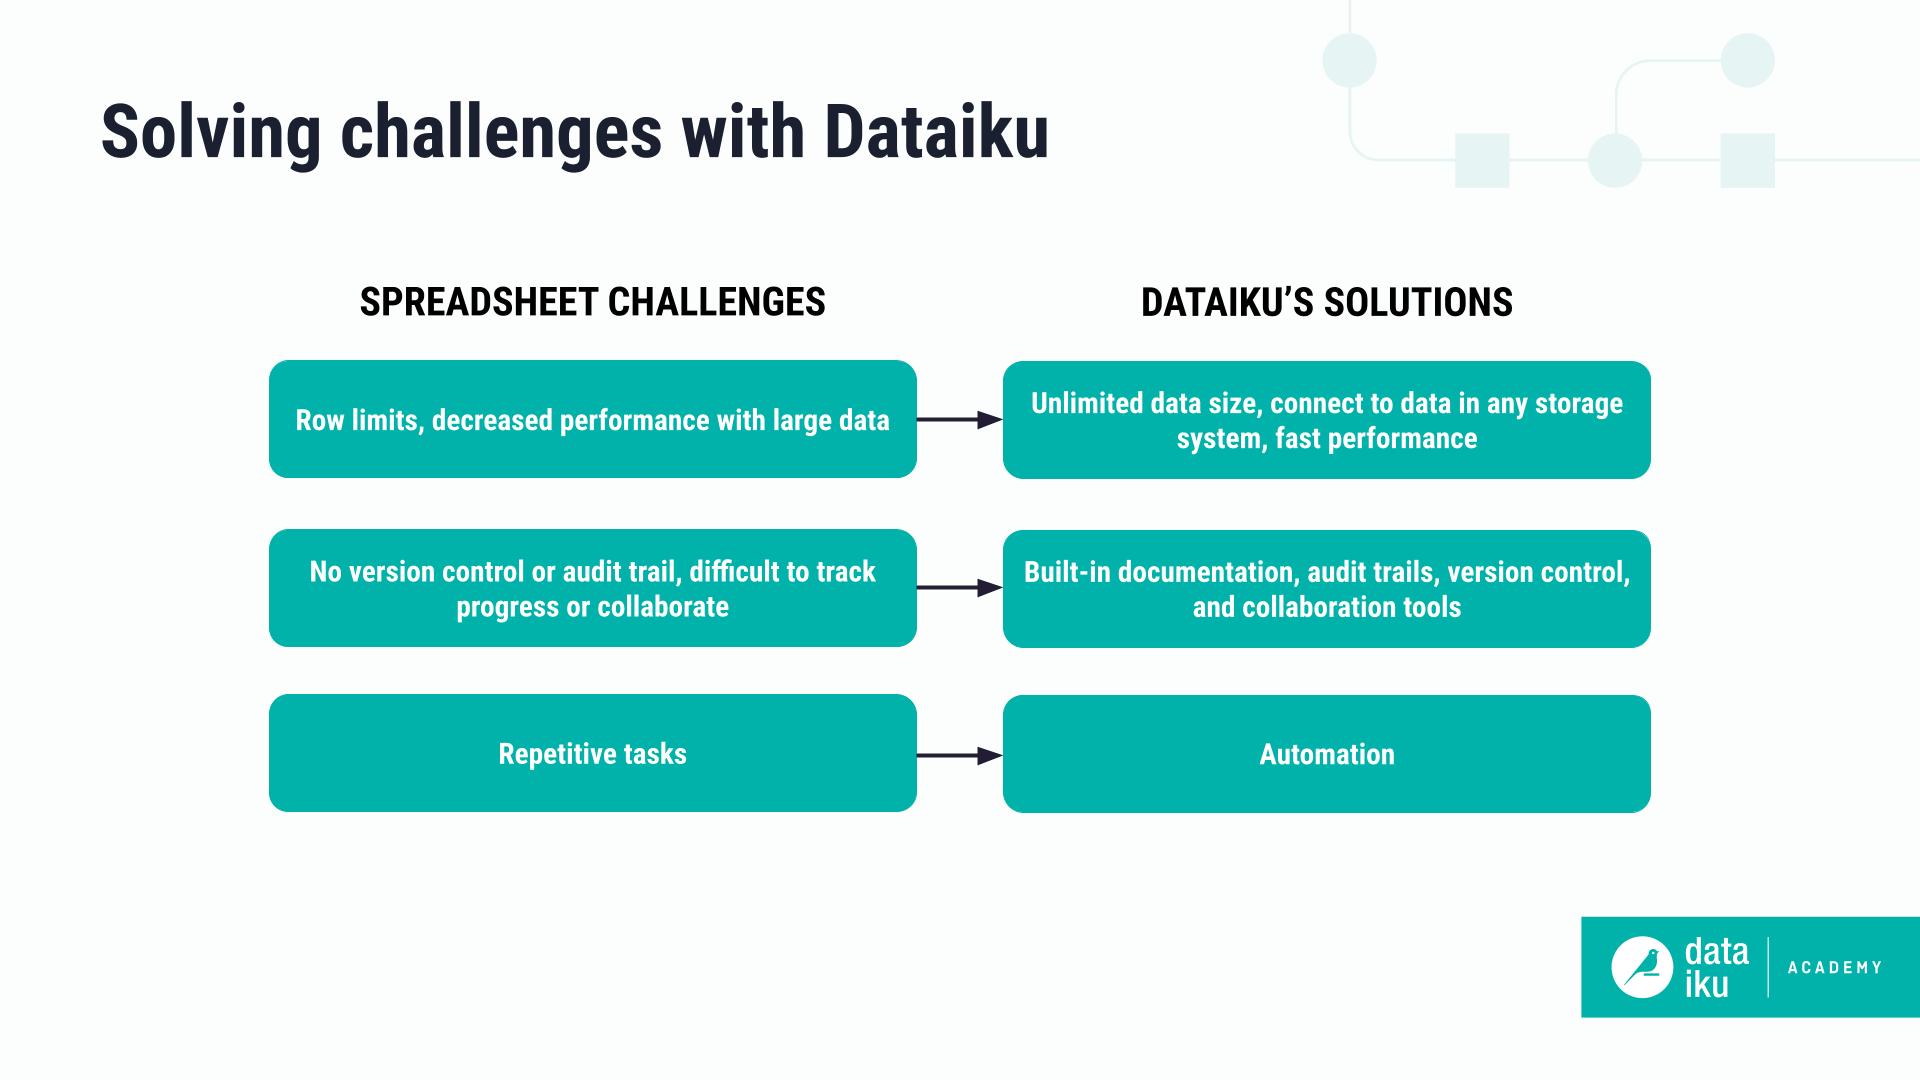 Image of several spreadsheet challenges and how they can be solved using Dataiku.